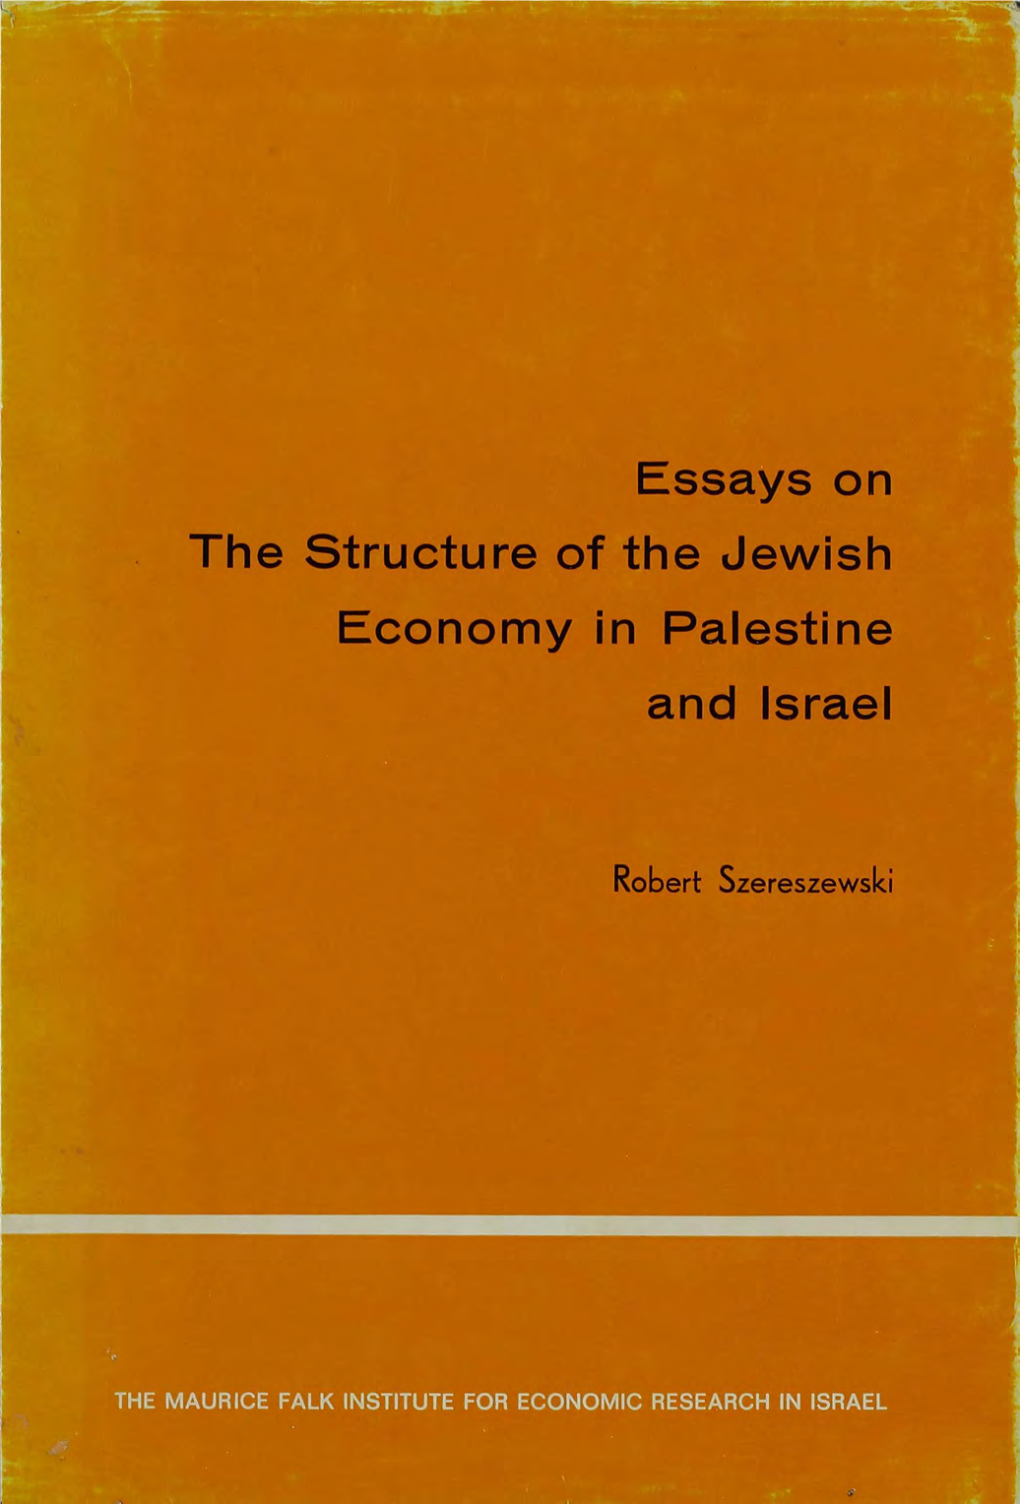 Essays on the Structure of the Jewish Economy in Palestine and Israel